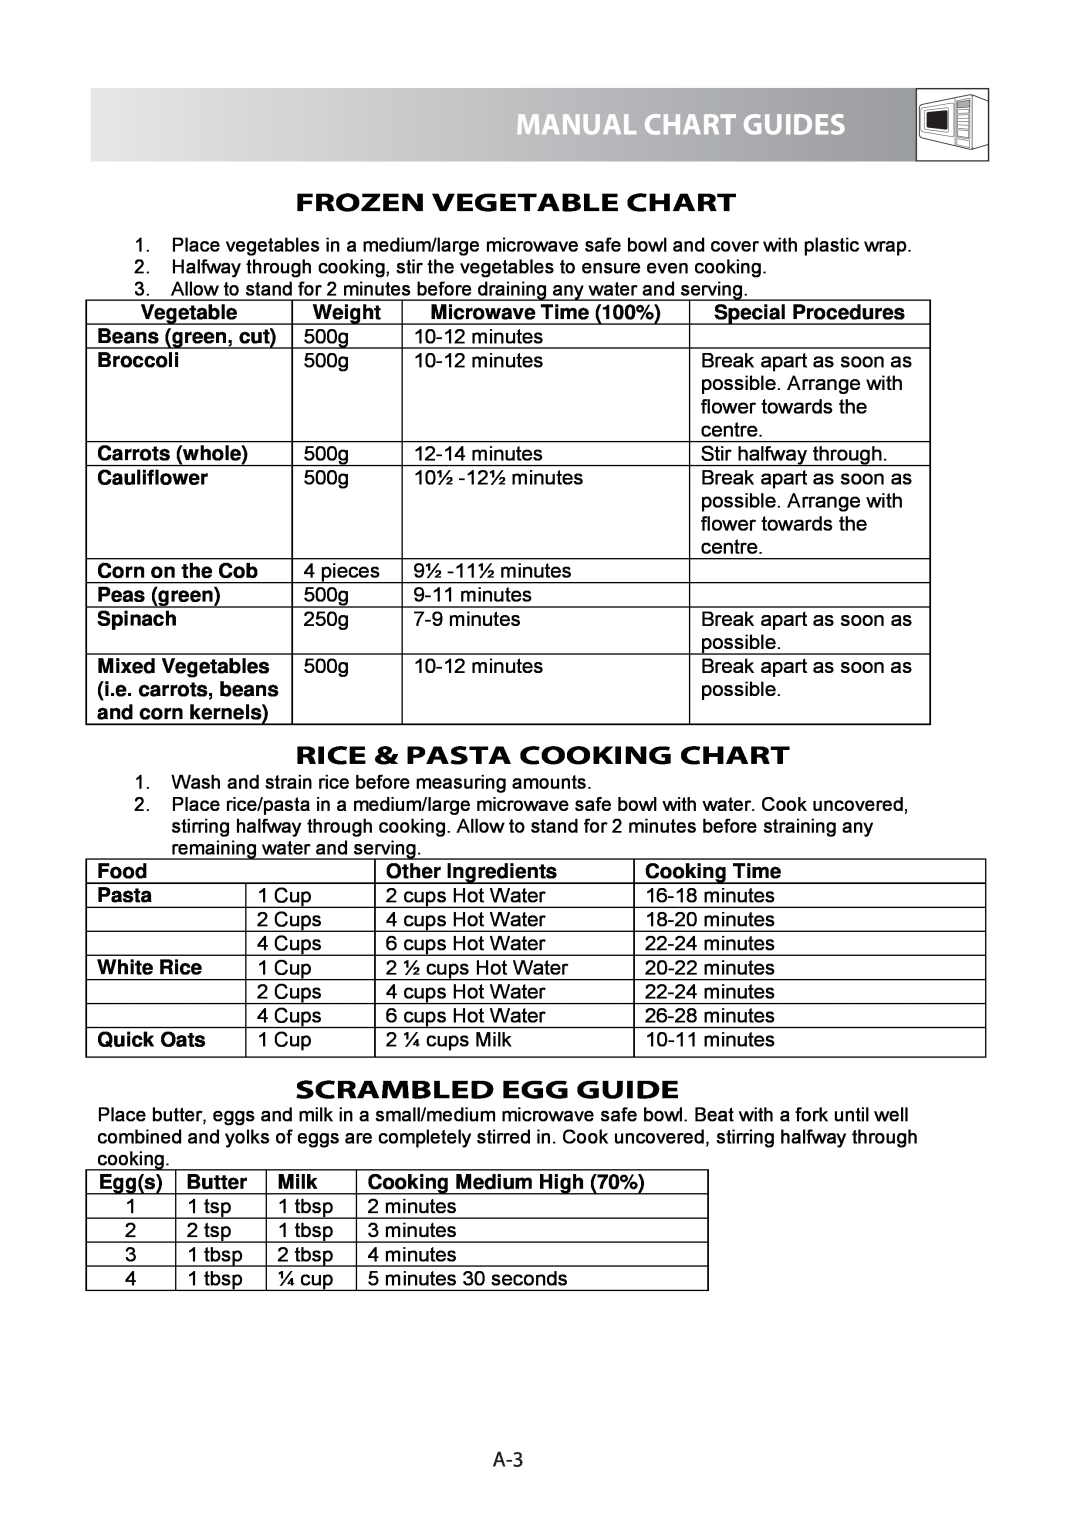 Sharp R-60A0S operation manual Frozen Vegetable Chart, Rice & Pasta Cooking Chart, Scrambled Egg Guide, Manual Chart Guides 